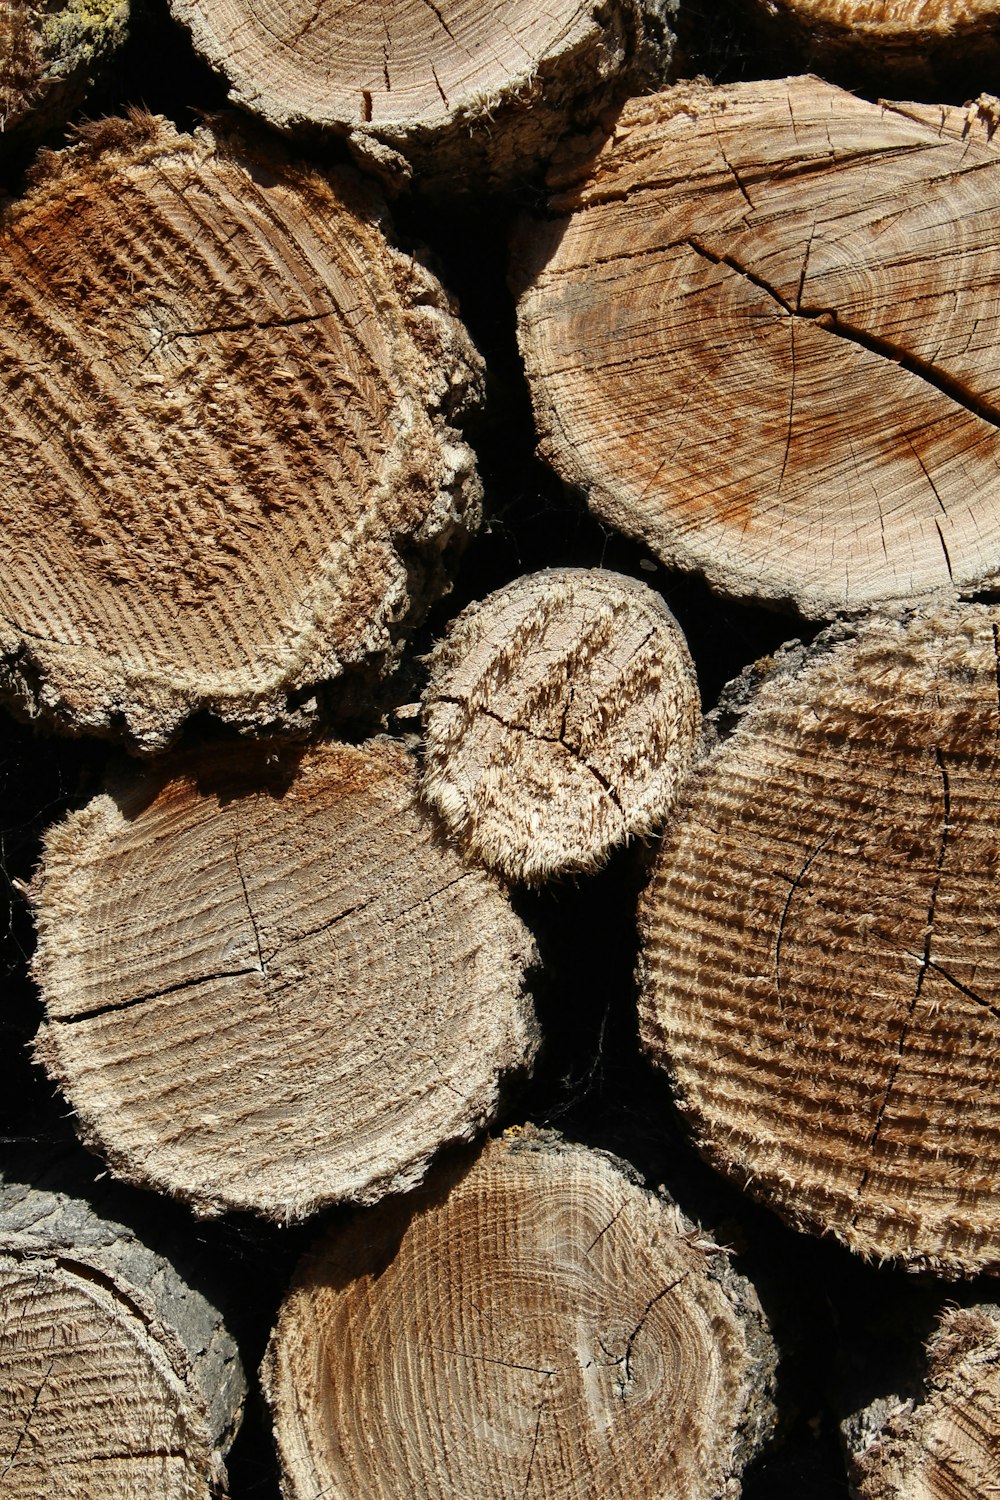 brown wood logs in close up photography